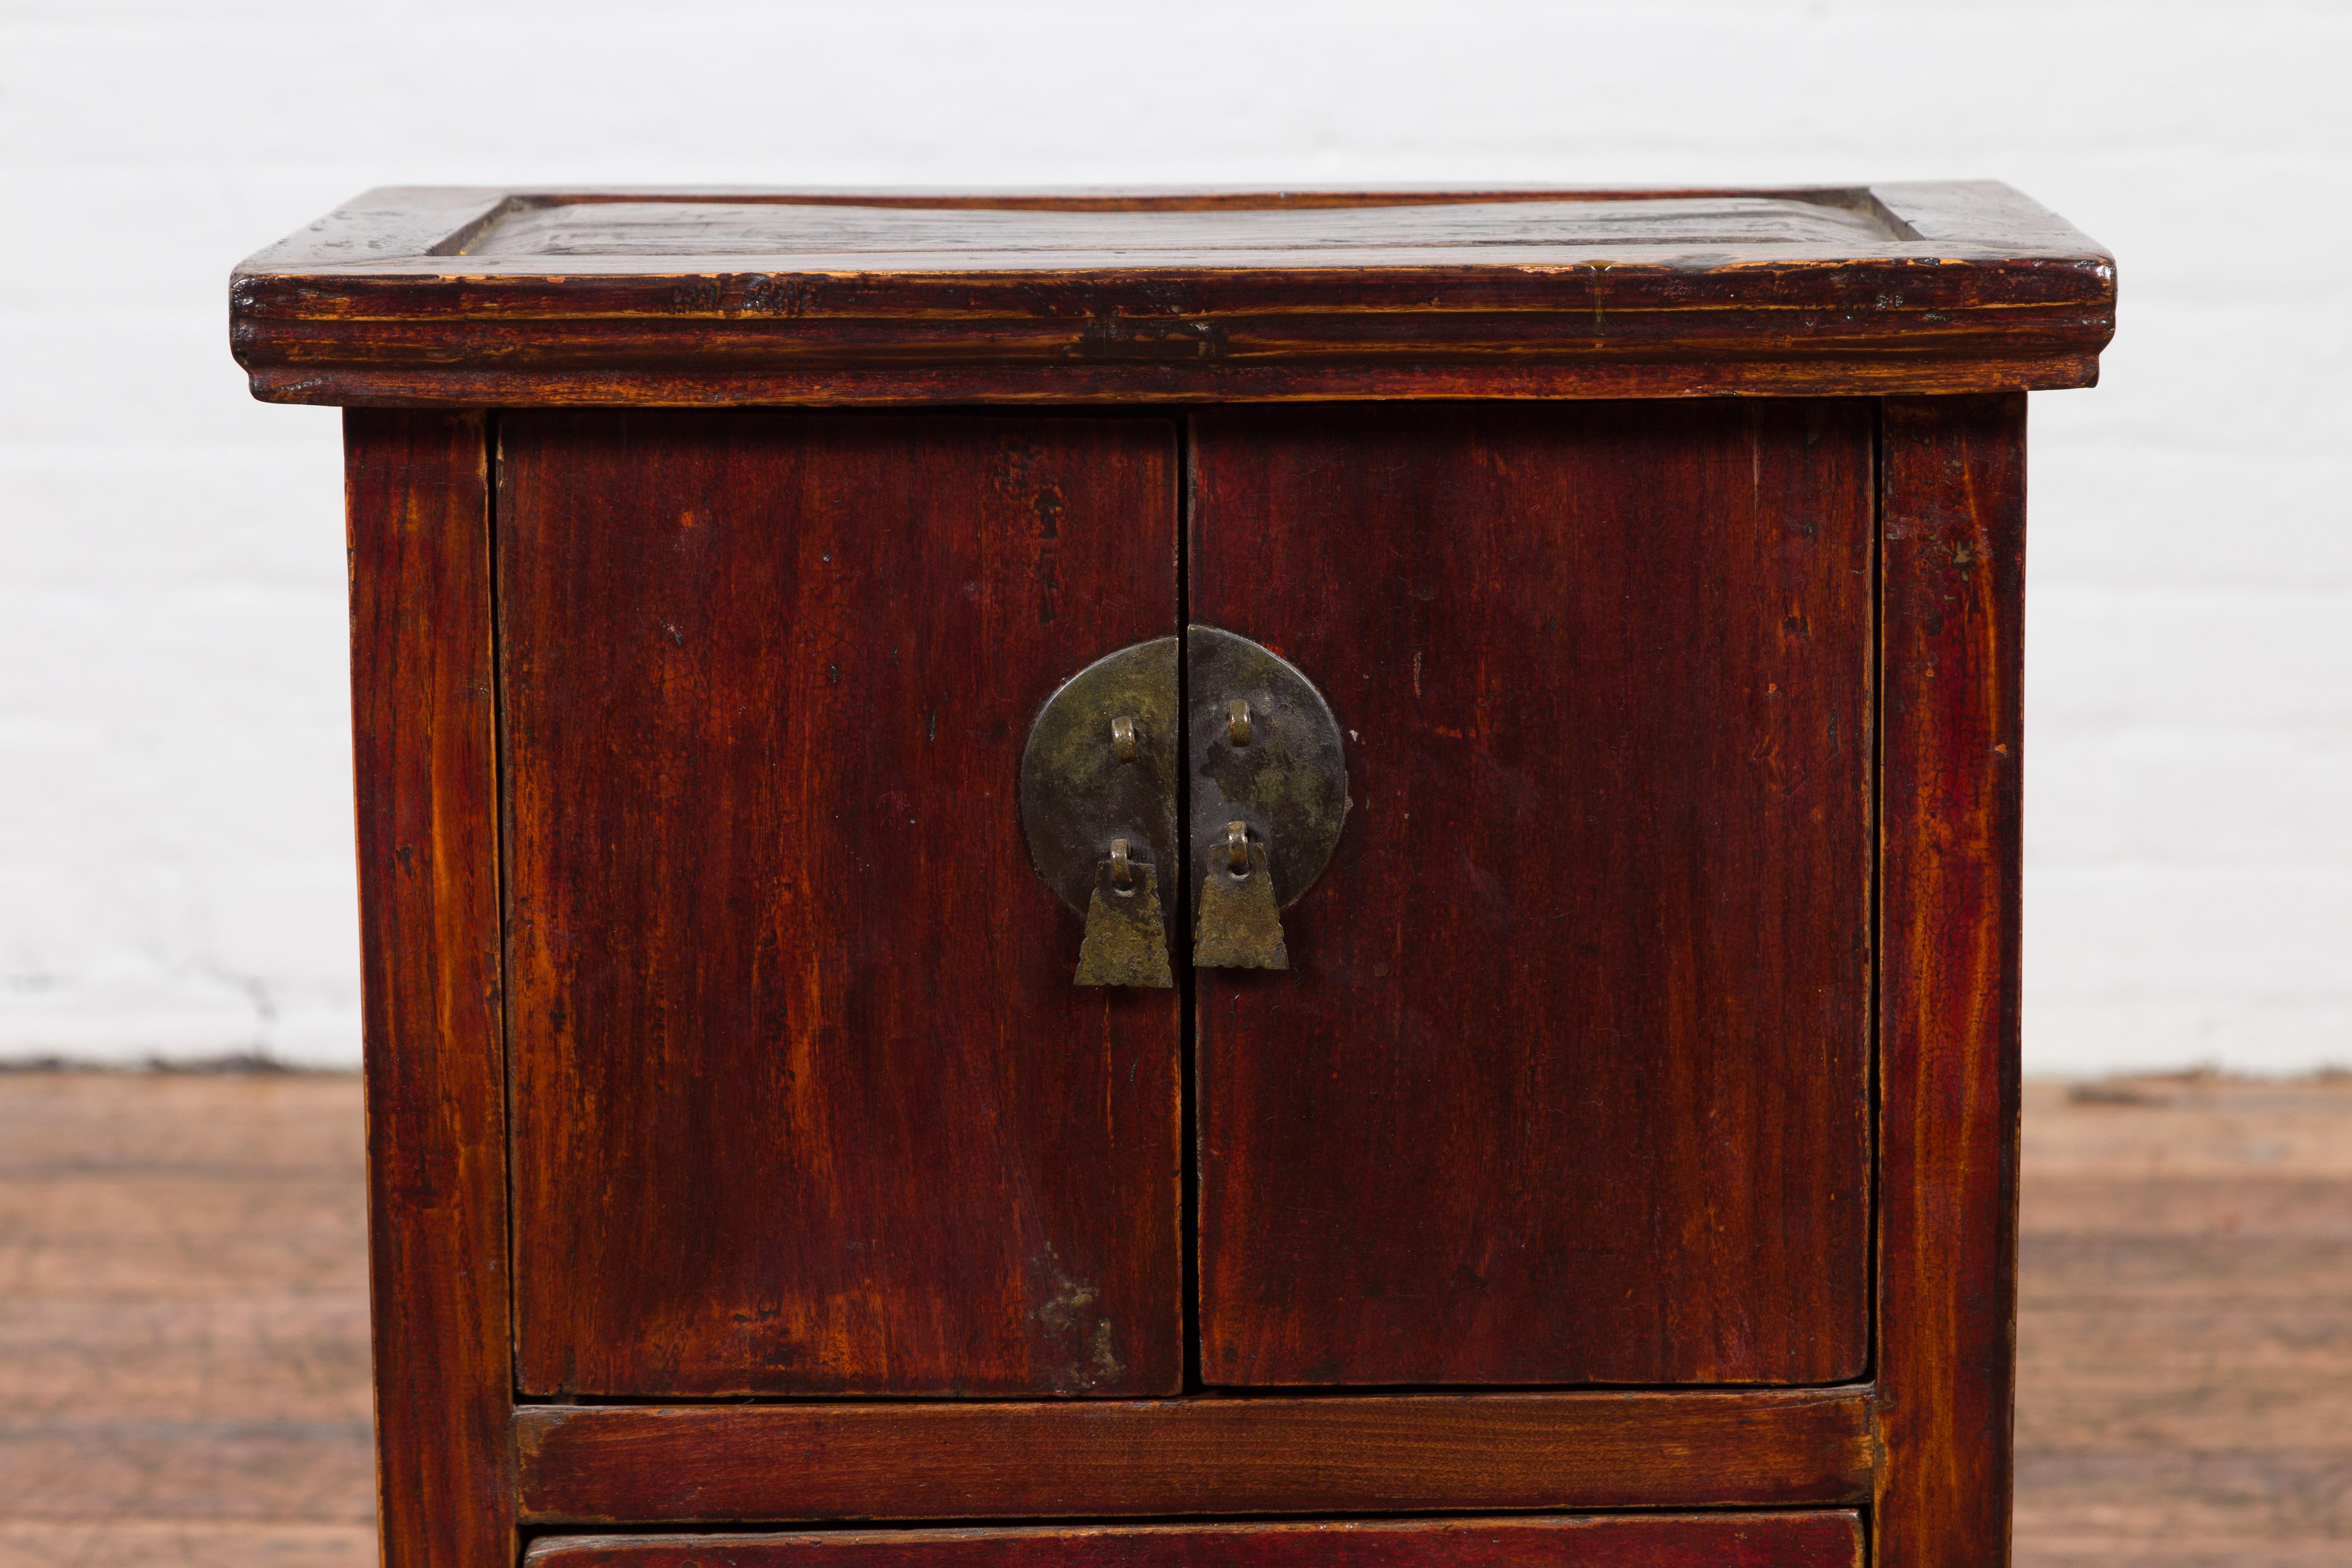 Wood Chinese Qing Dynasty 19th Century Bedside Table with Double Doors and Low Drawer